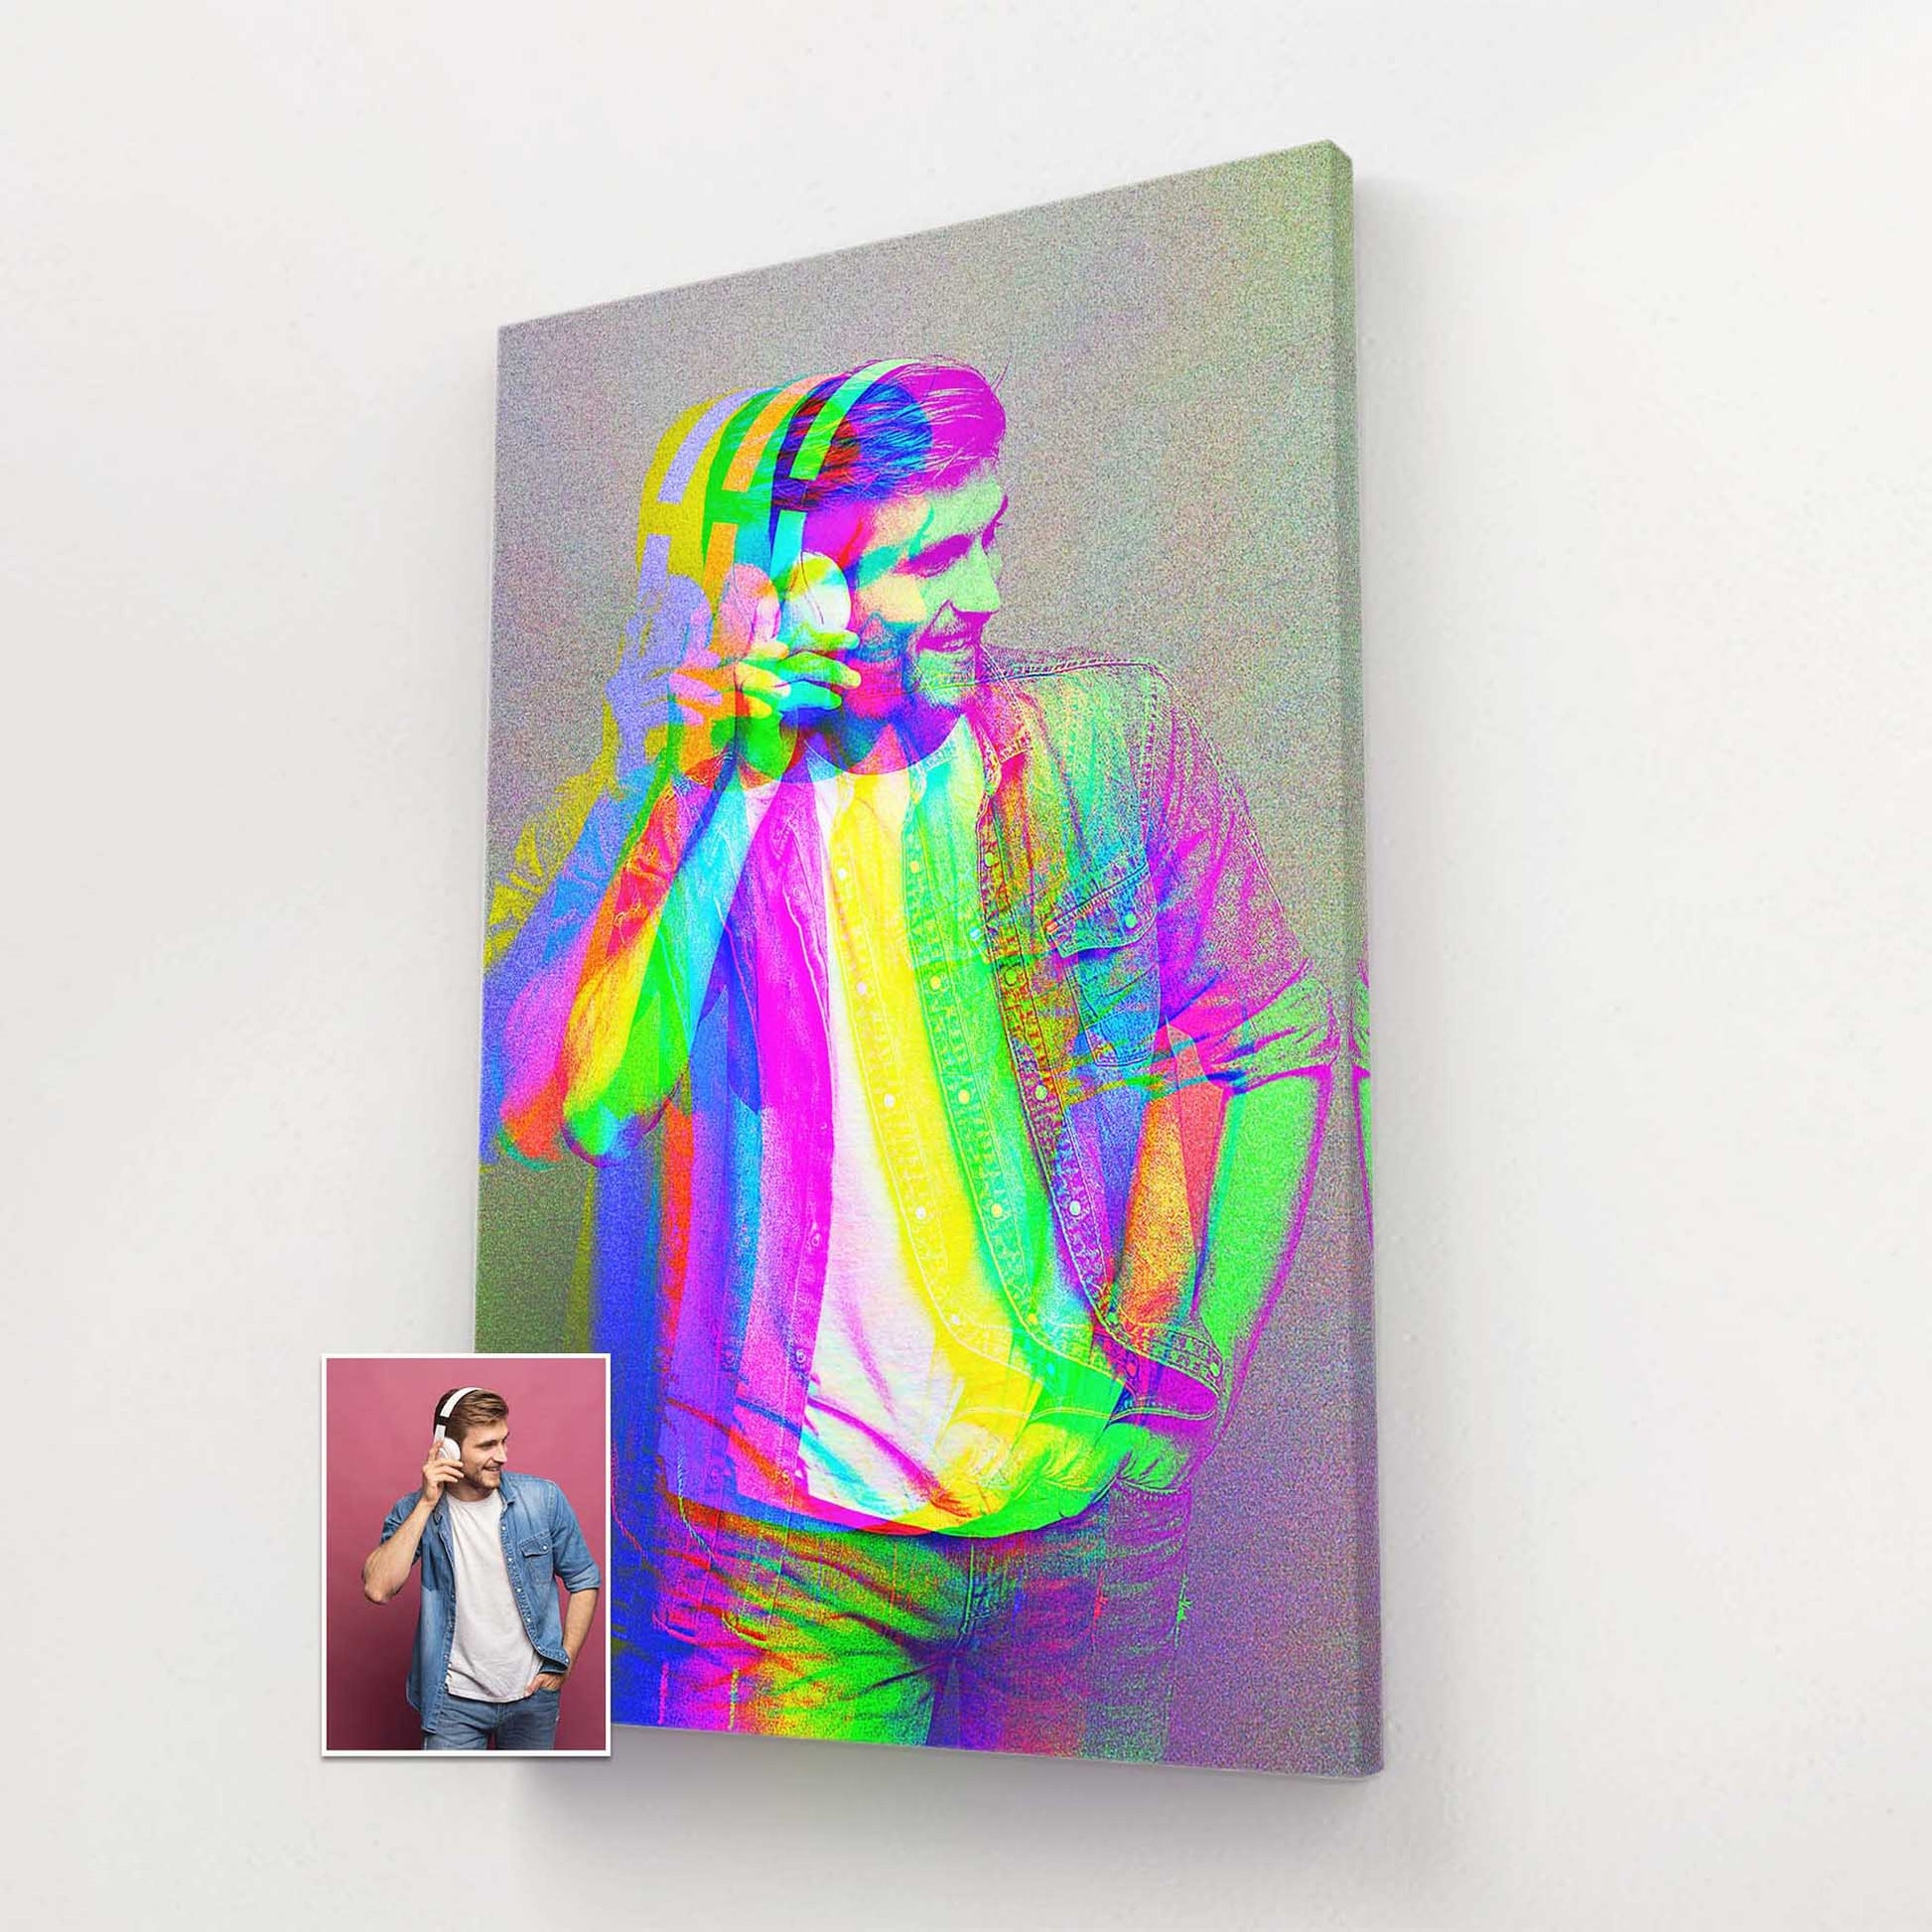 Immerse yourself in the world of personalised anaglyph 3D canvases